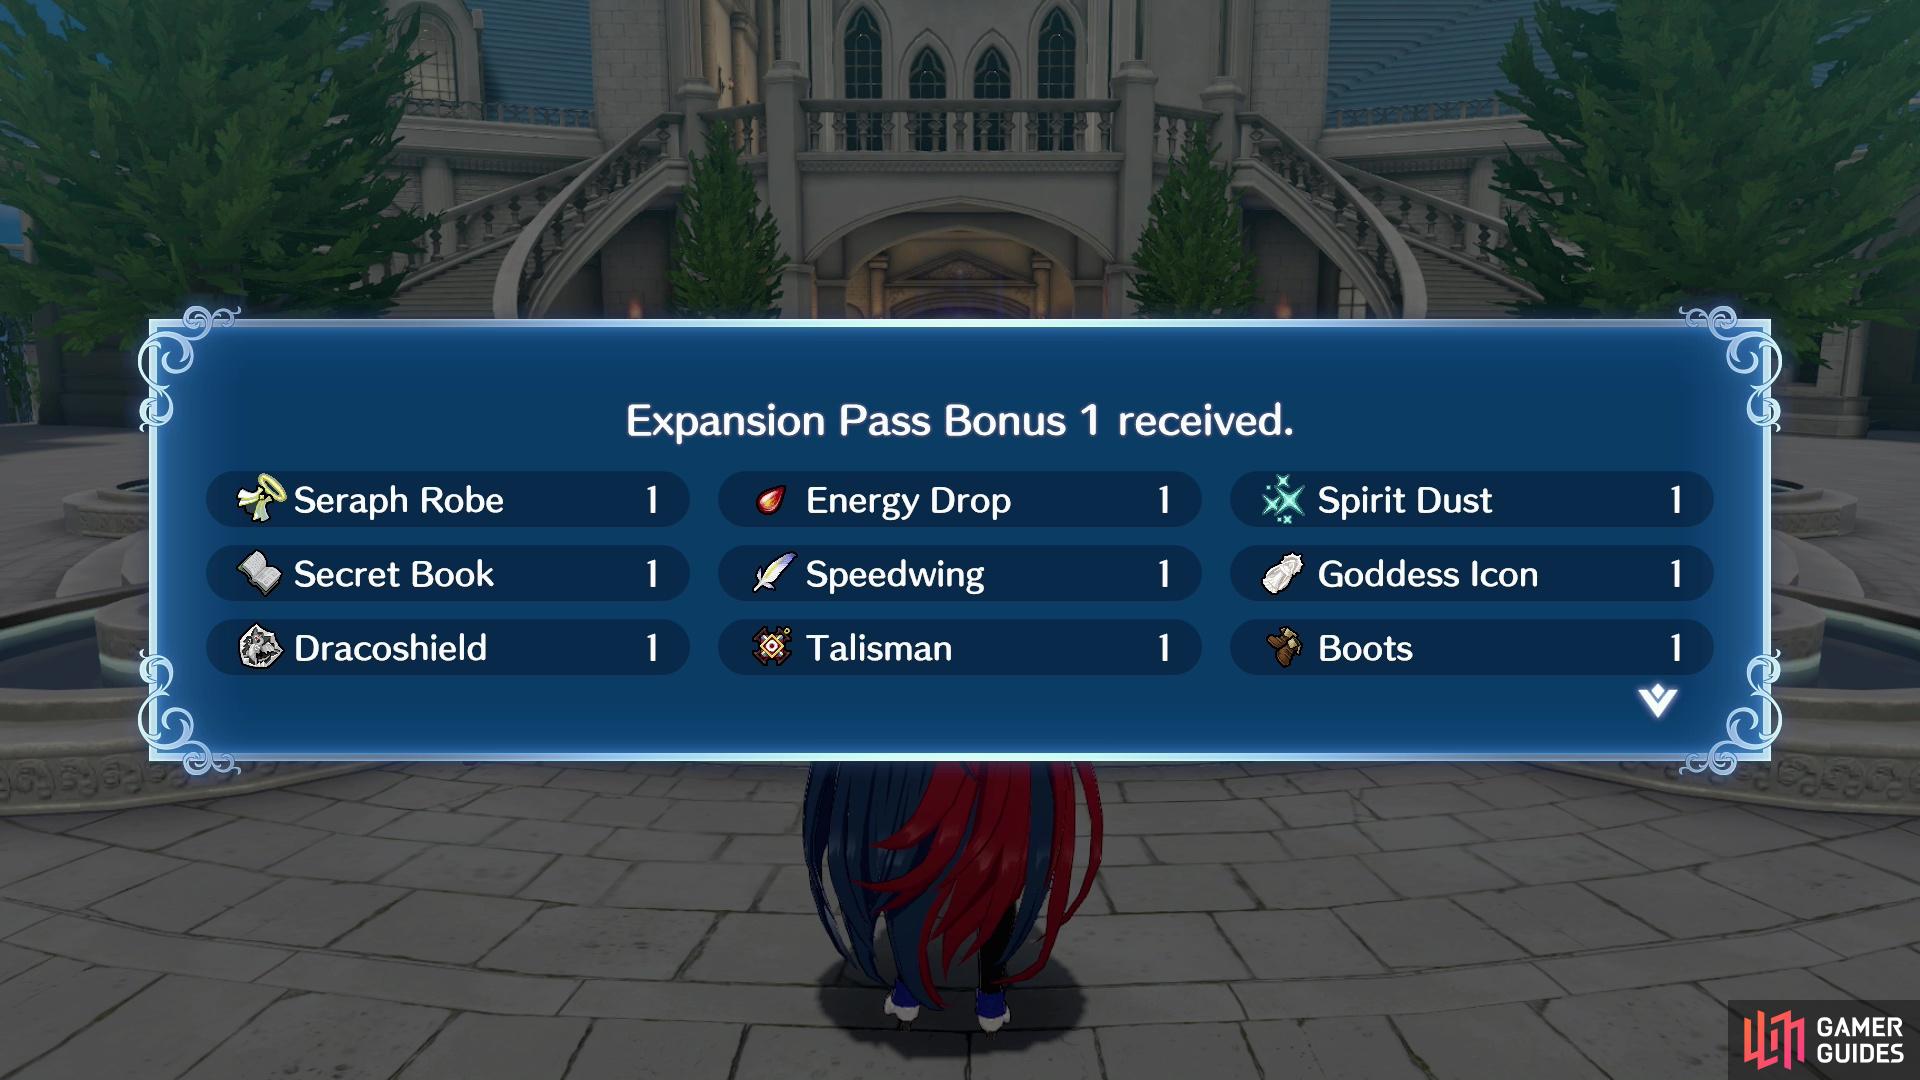 If you have the Expansion !Pass, you'll be rewarded with a variety of stat-boosting items.